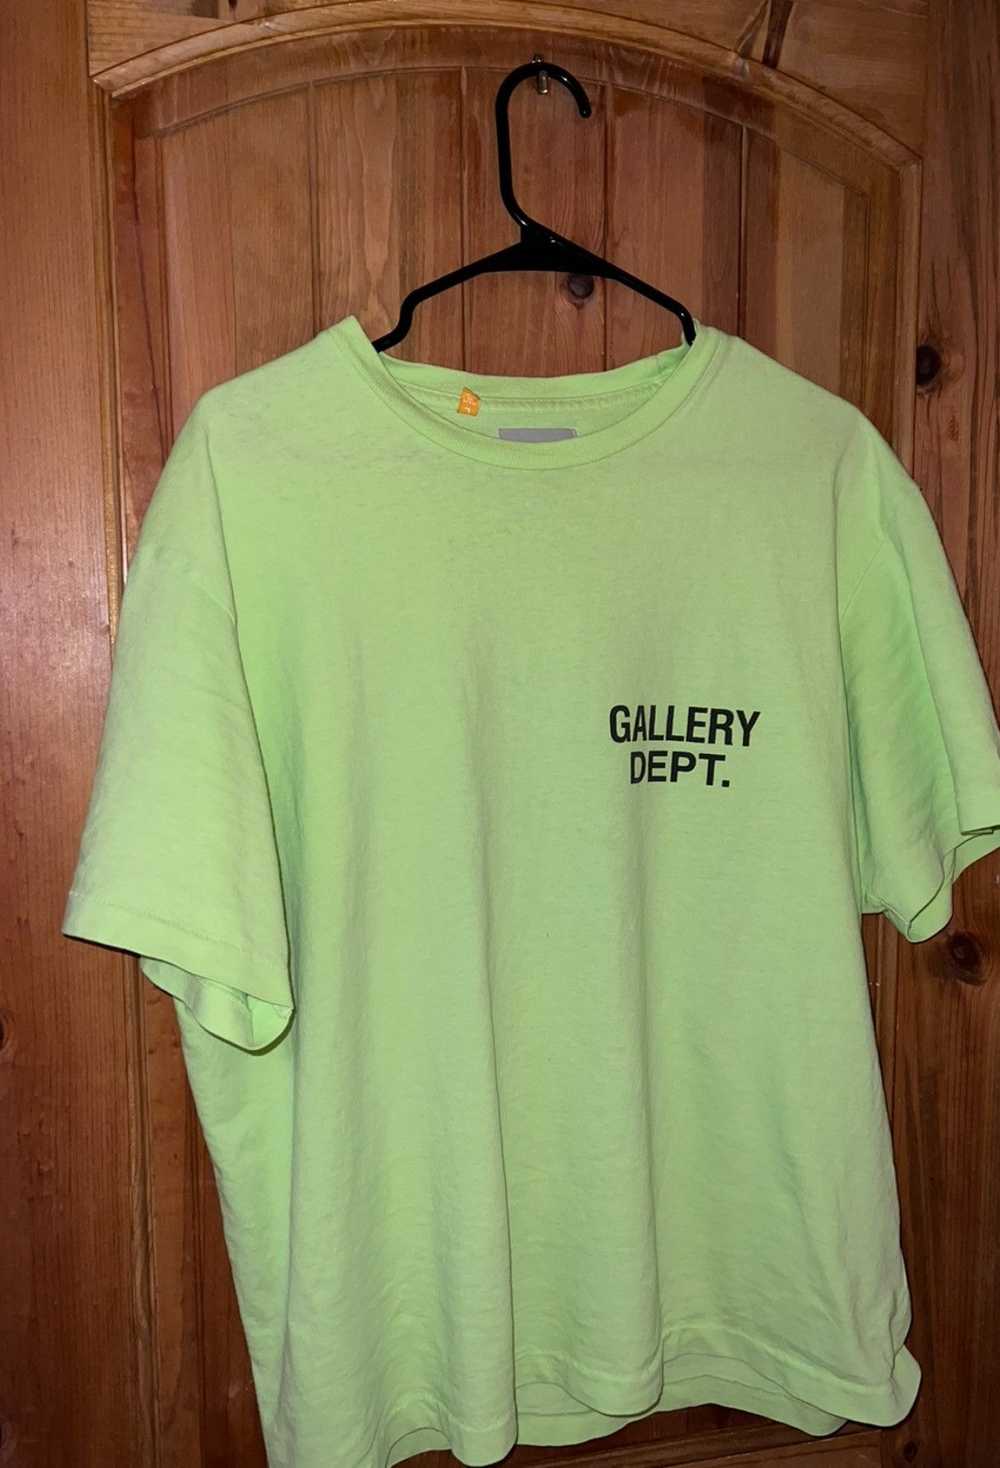 Gallery Dept. Lime Green Gallery Dept. T-shirt - image 1